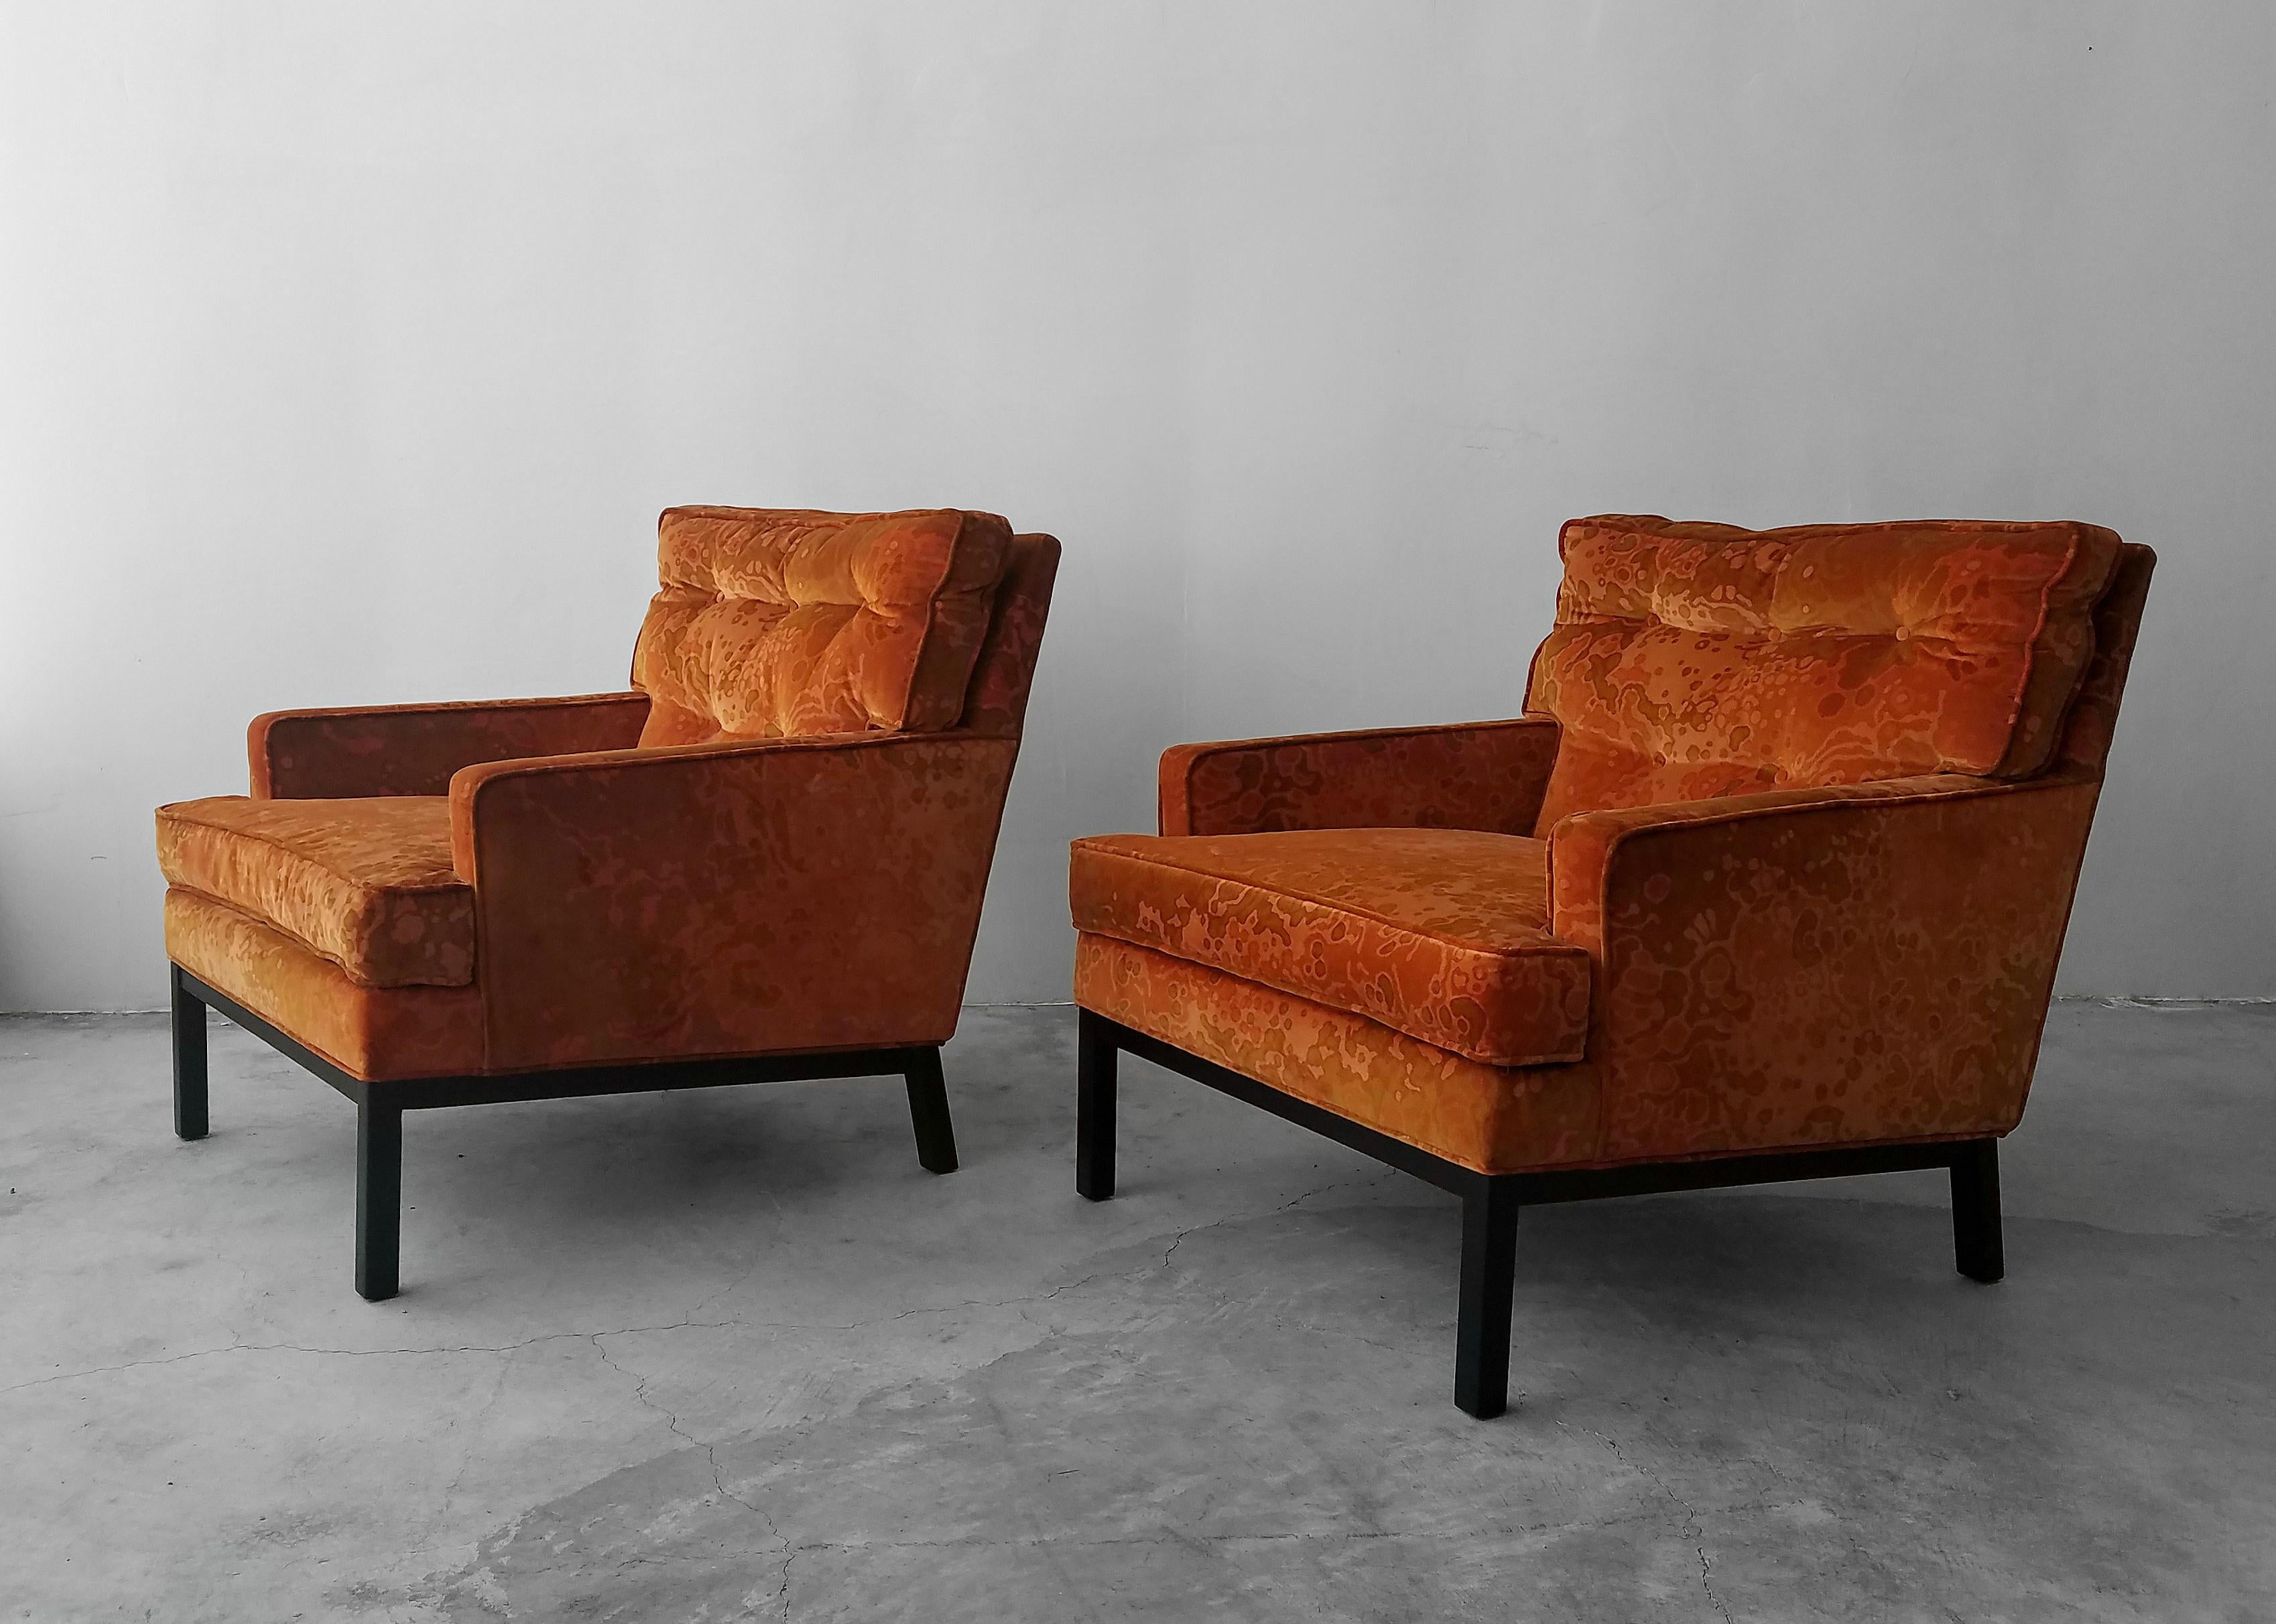 These funky Harvey Probber lounge chairs are all original in their great burnt orange Jack Lenor Larsen velvet. A rare find. Perfect for someone vamping a 1970s shag pad or a Palm Springs ranch.

We have 4 of these same chairs available, in 2